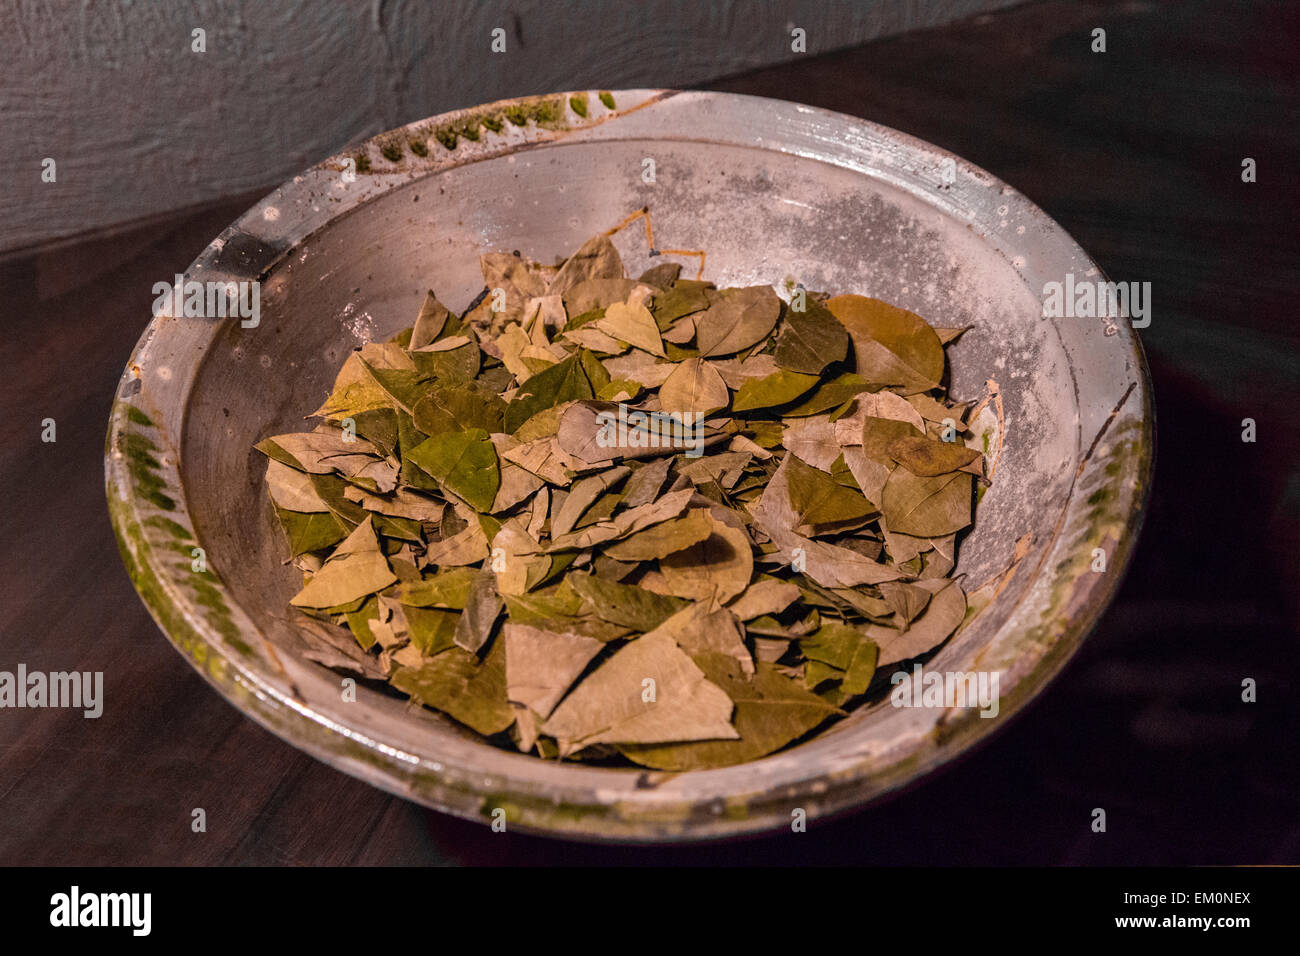 Peru, Cusco.  Bowl of Coca Leaves.  Tea from coca helps reduce effects of Cusco's 11,000-foot altitude. Stock Photo